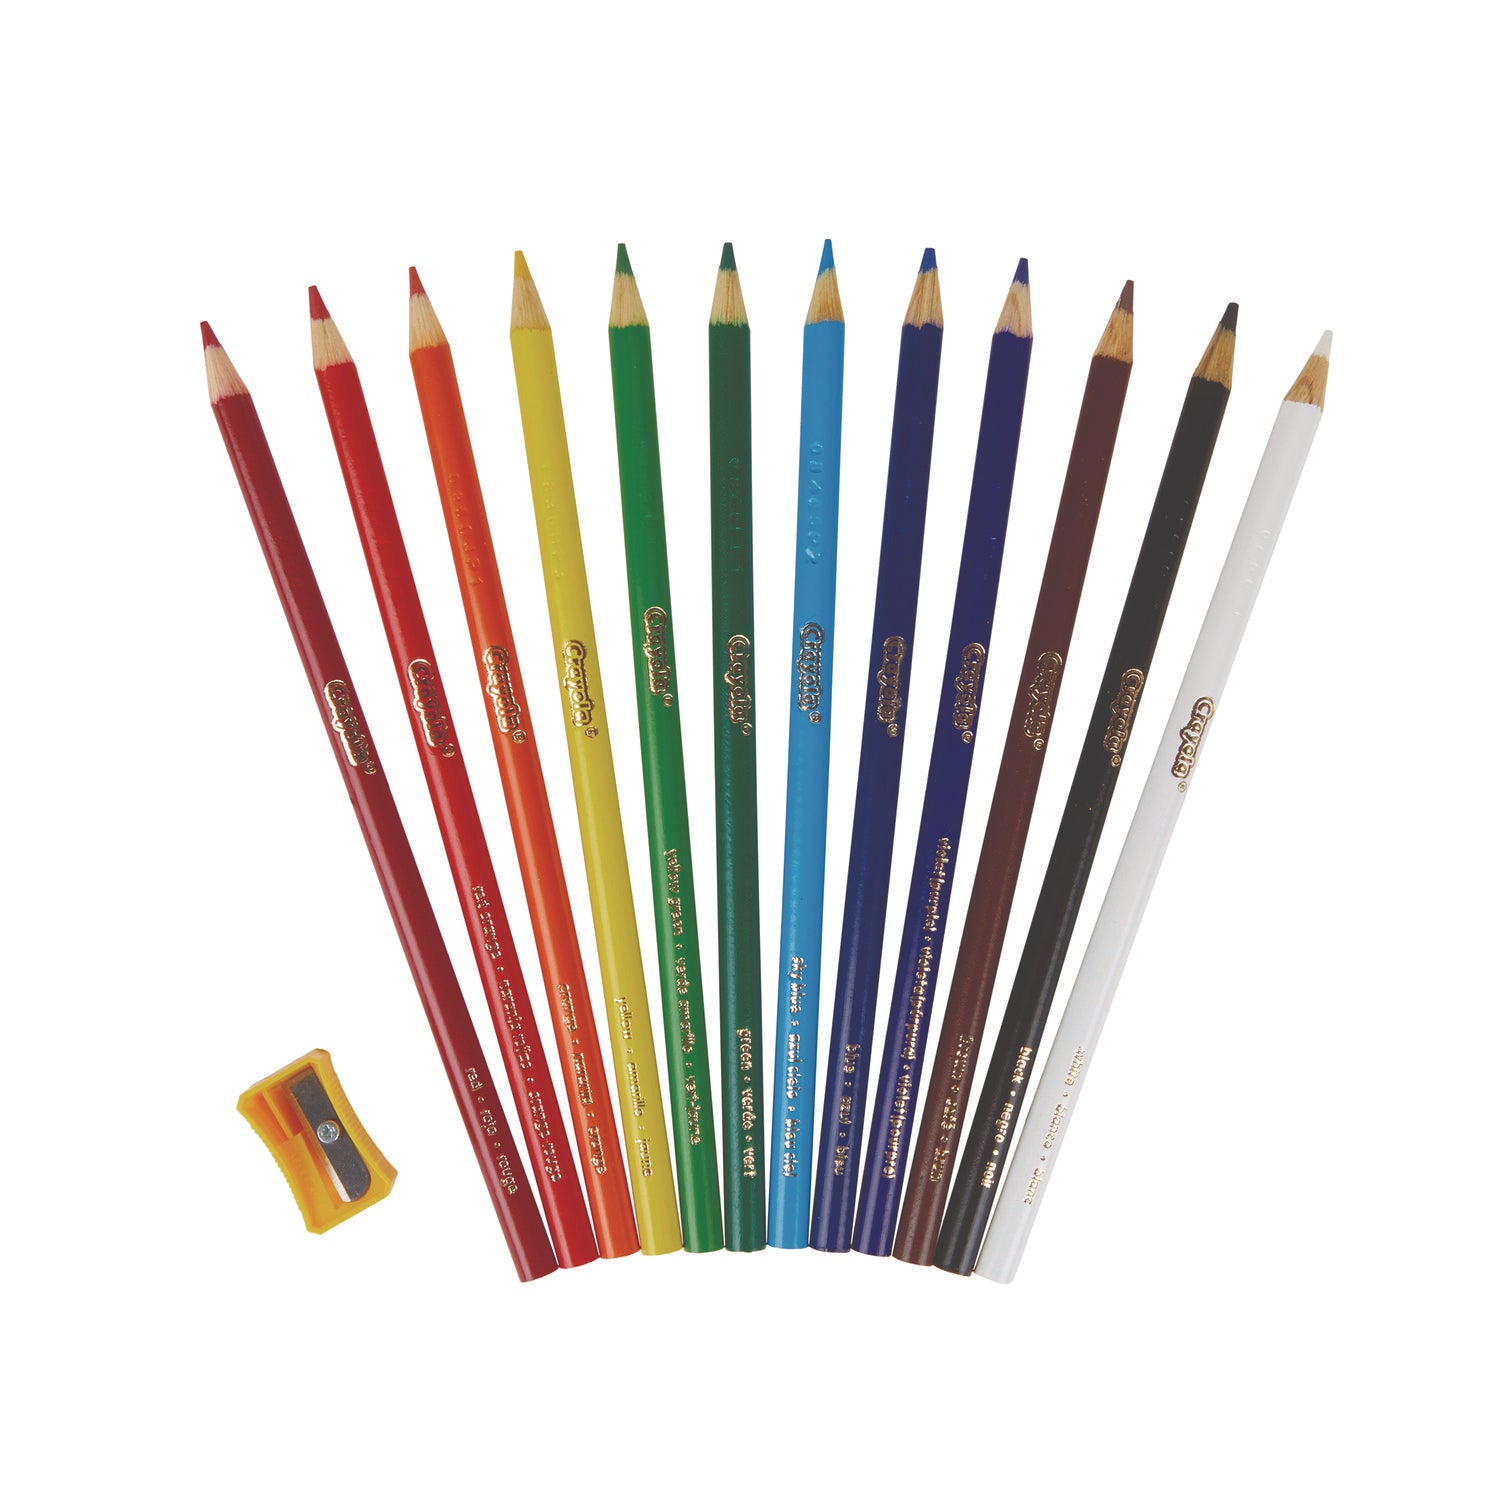 color-pencil-classpack-set-with-240-pencils-and-12-pencil-sharpeners-assorted-lead-and-barrel-colors-240-pack_cyo687506 - 5